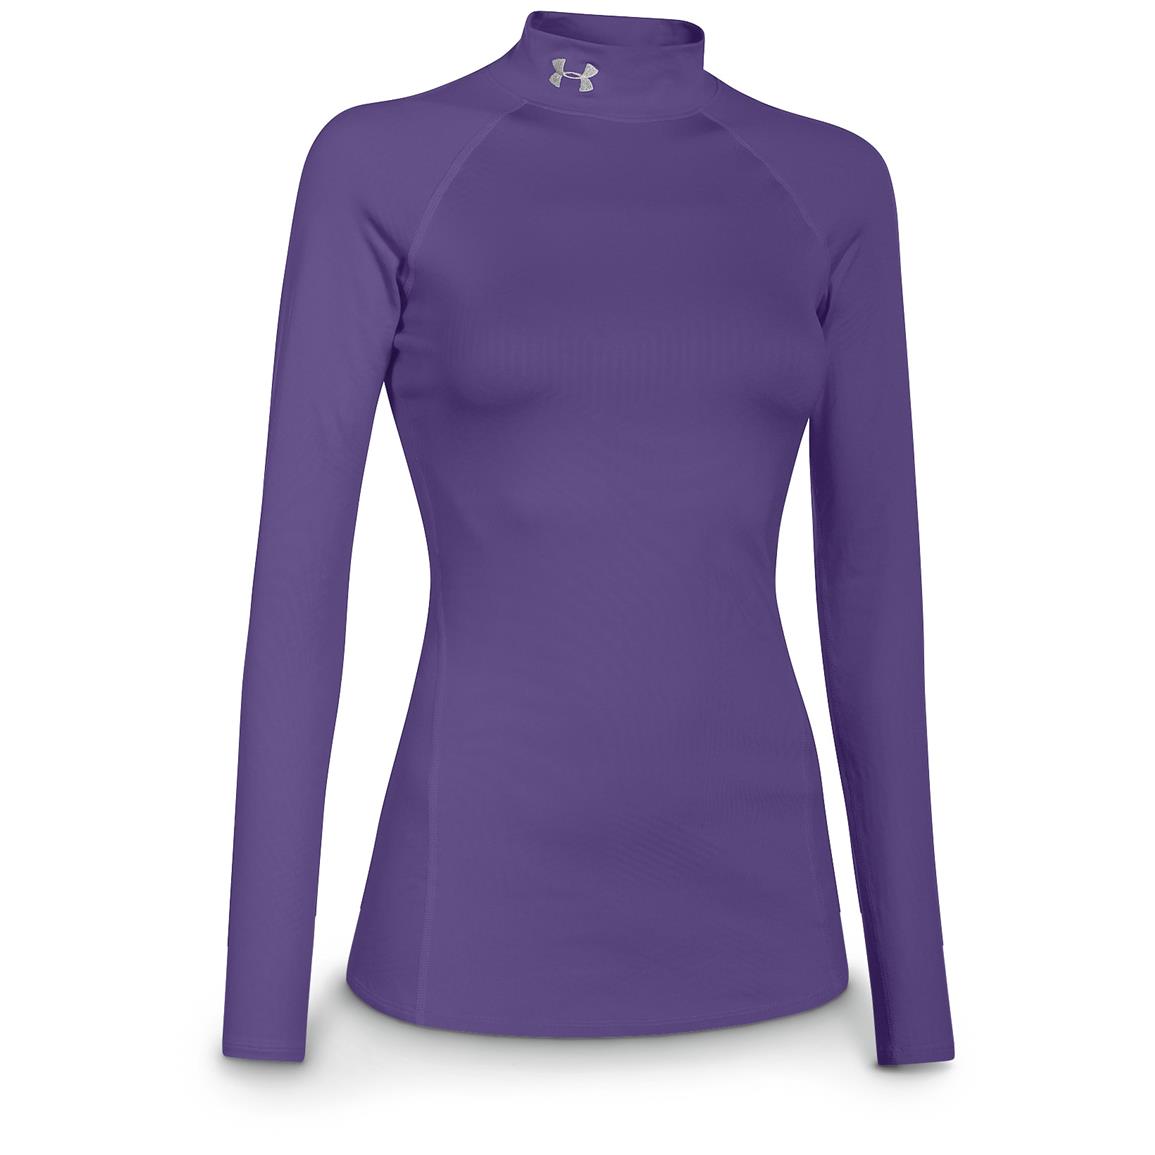 Cheap under armour cold gear 4.0 review 